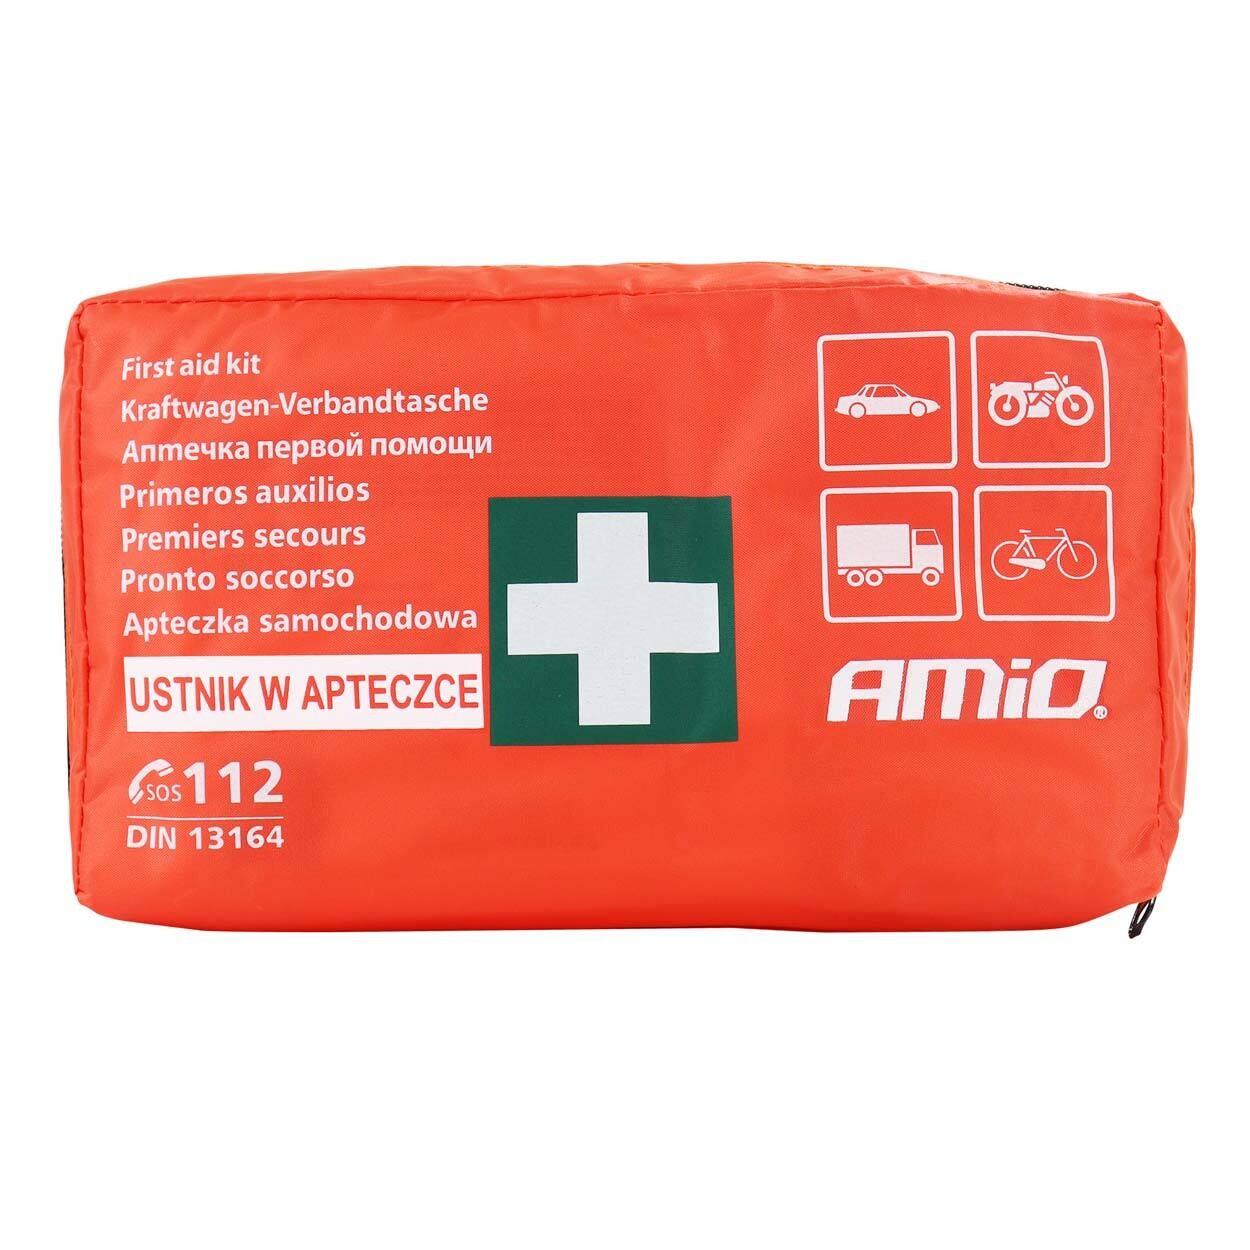 DIN 13164 first aid kit with mouthpiece